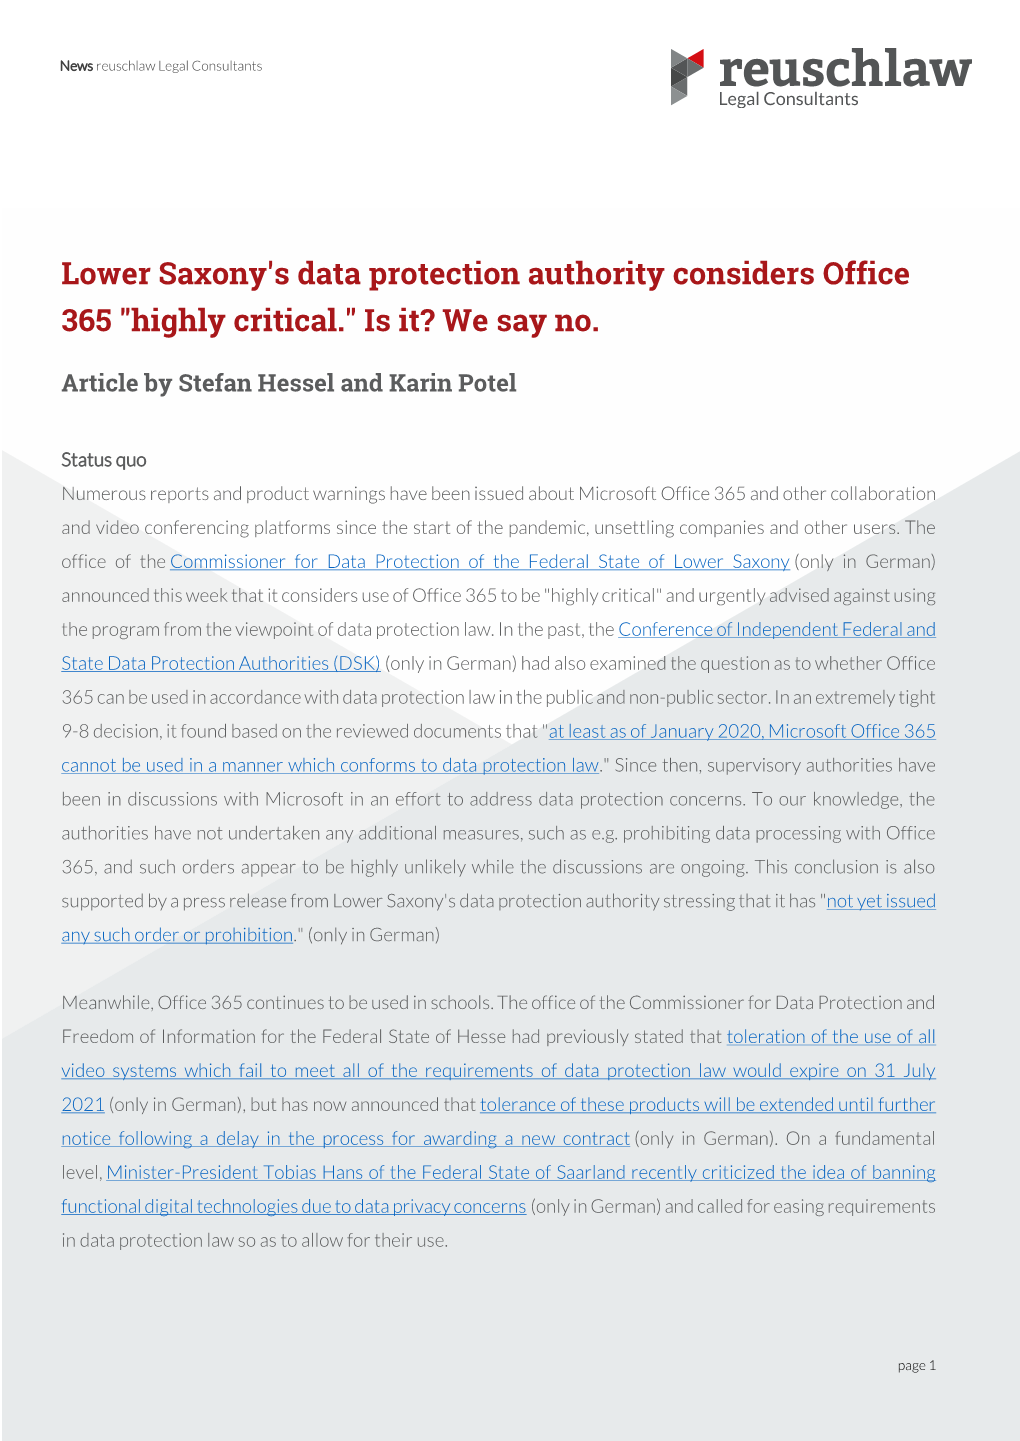 Lower Saxony's Data Protection Authority Considers Office 365 "Highly Critical." Is It? We Say No